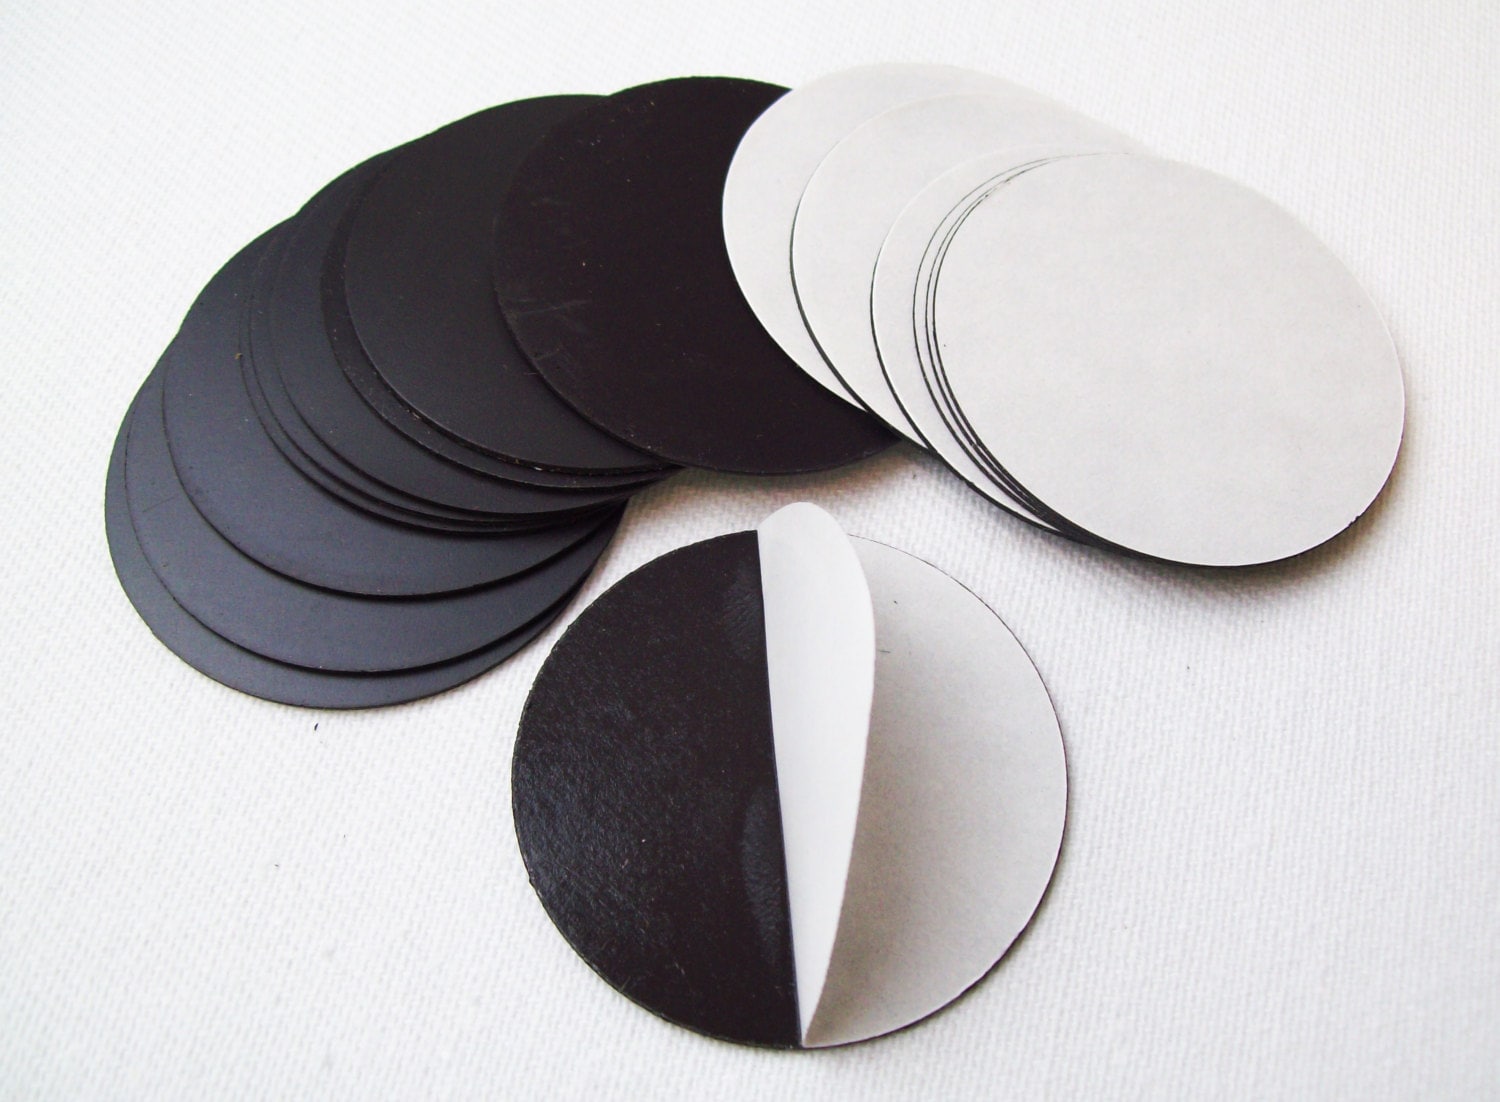 Round 2.625 Magnets with Peel and Stick Adhesive MAGNETS ONLY - 100 pcs